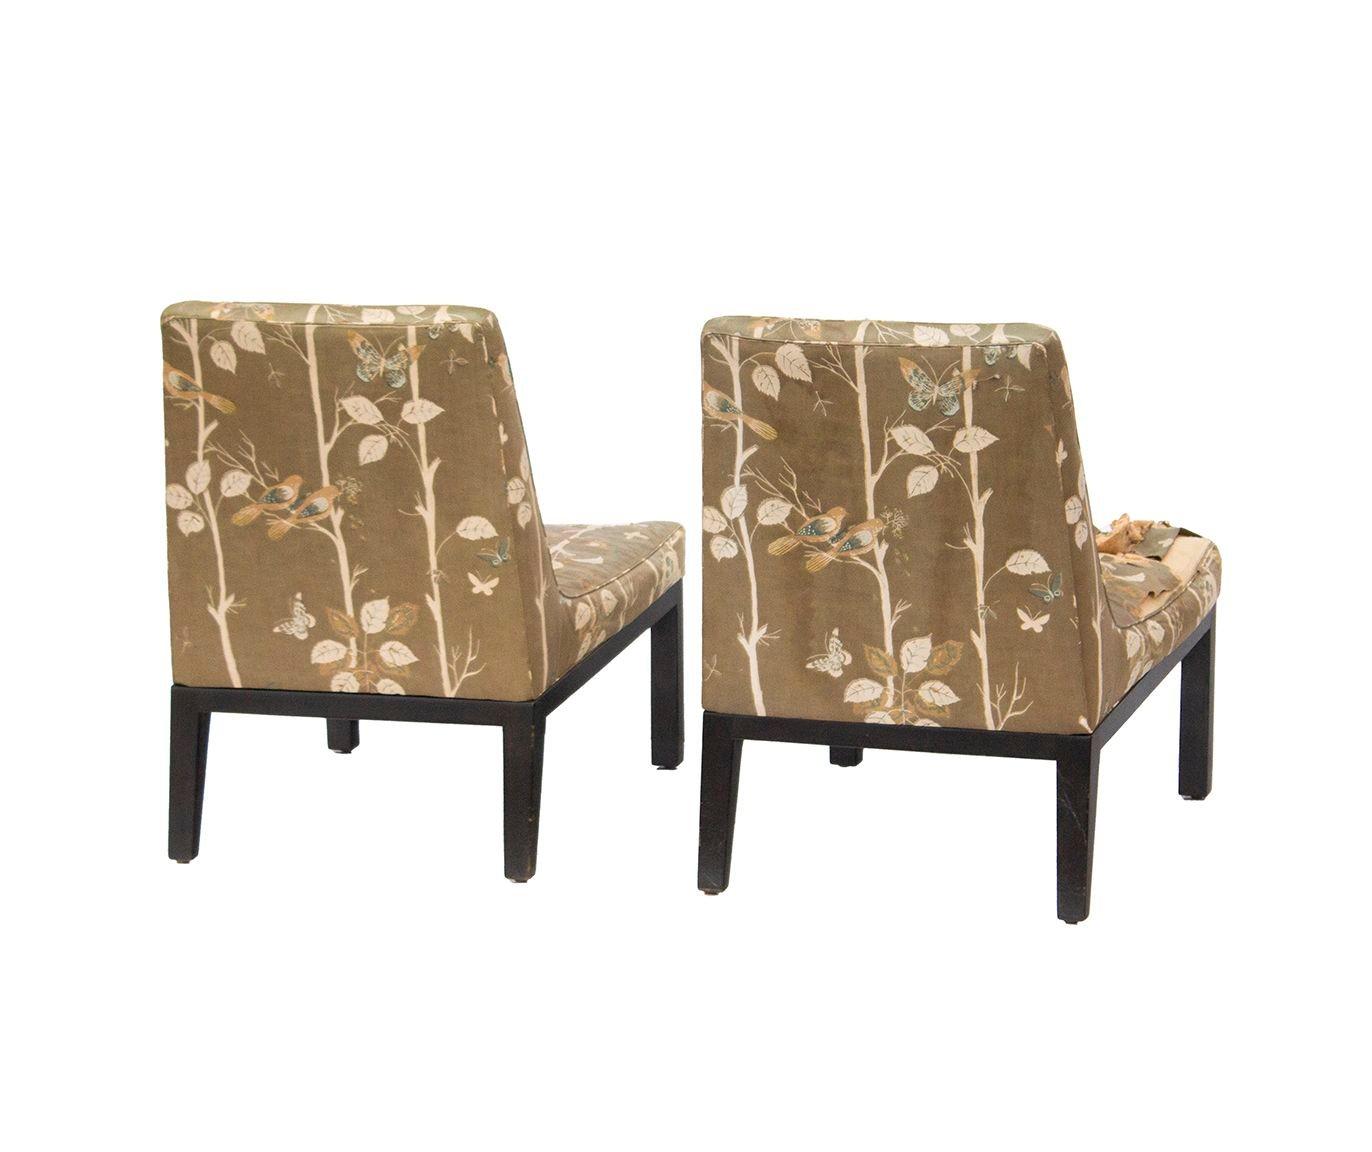 Tufted Slipper Chairs by Edward Wormley for Dunbar, pair For Sale 1